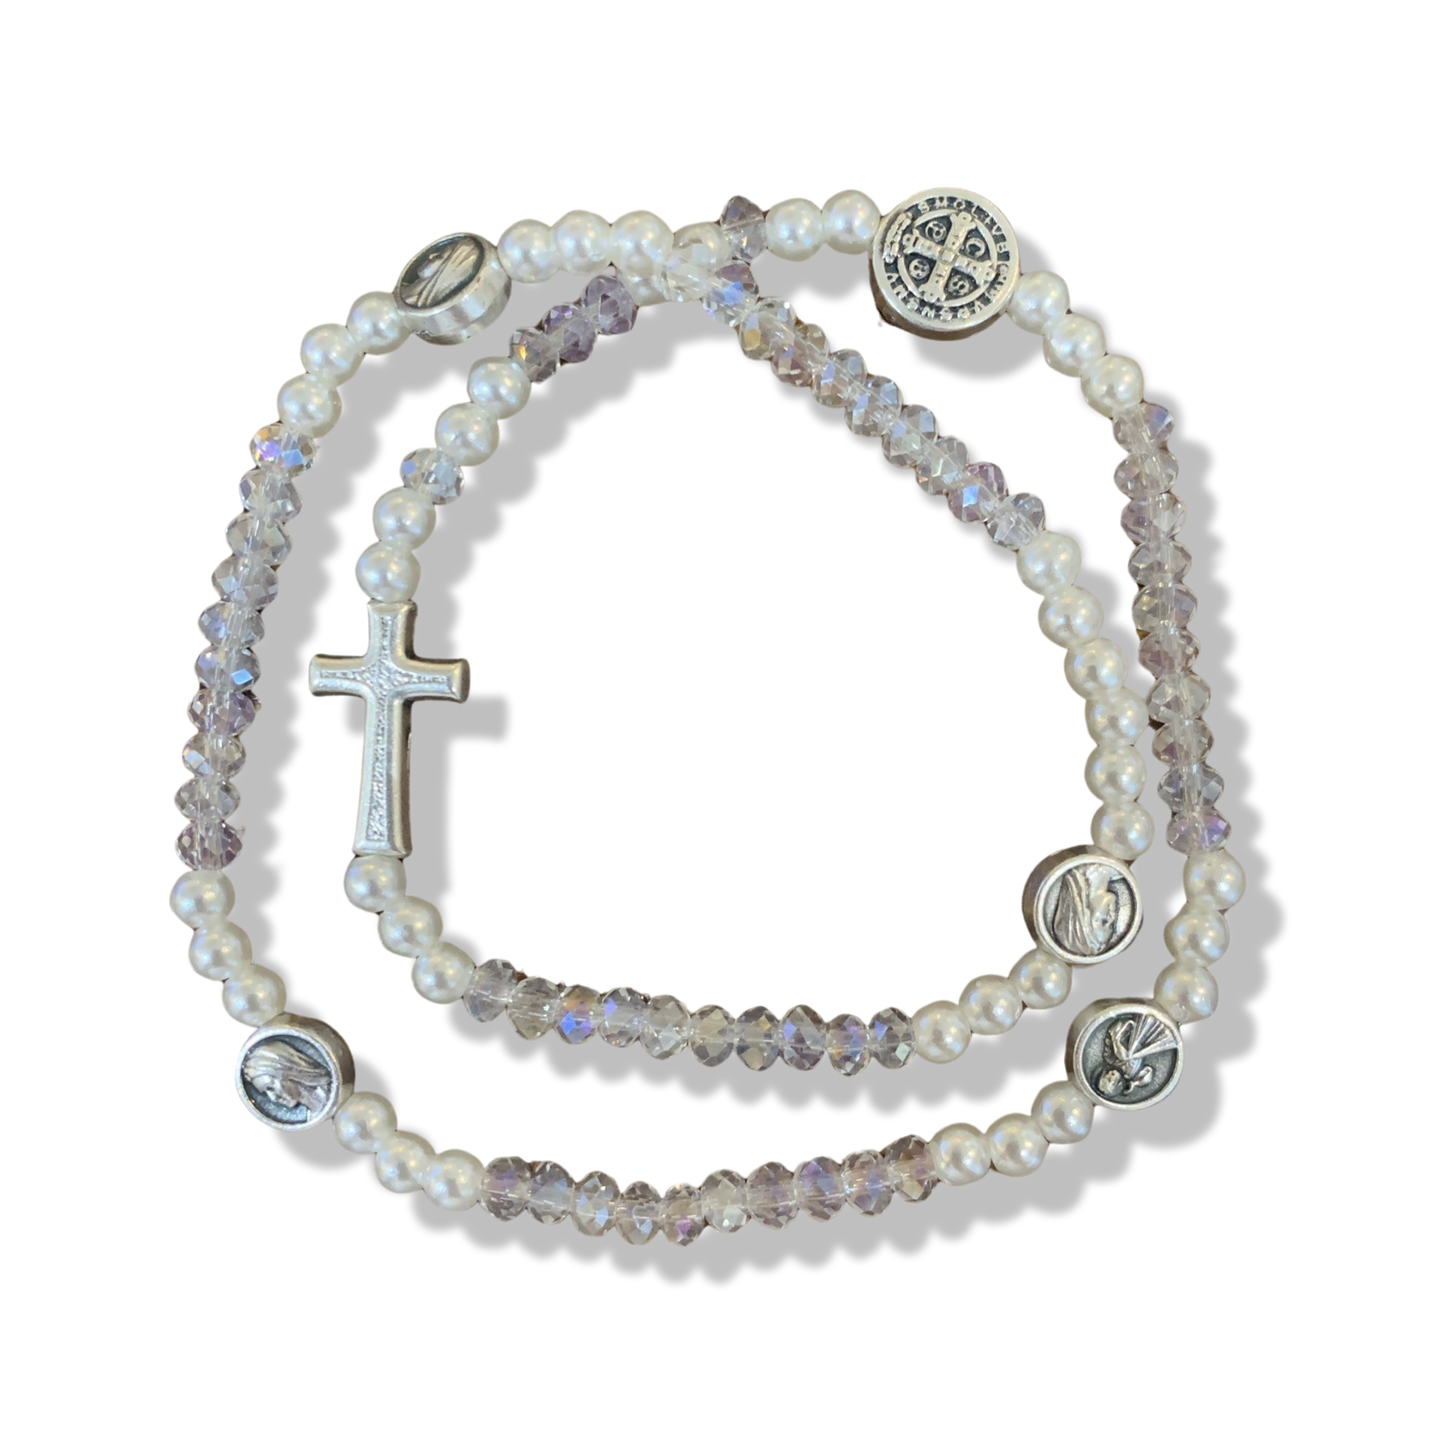 Beaded Wrap-Around Rosary Bracelet of Assorted Colors